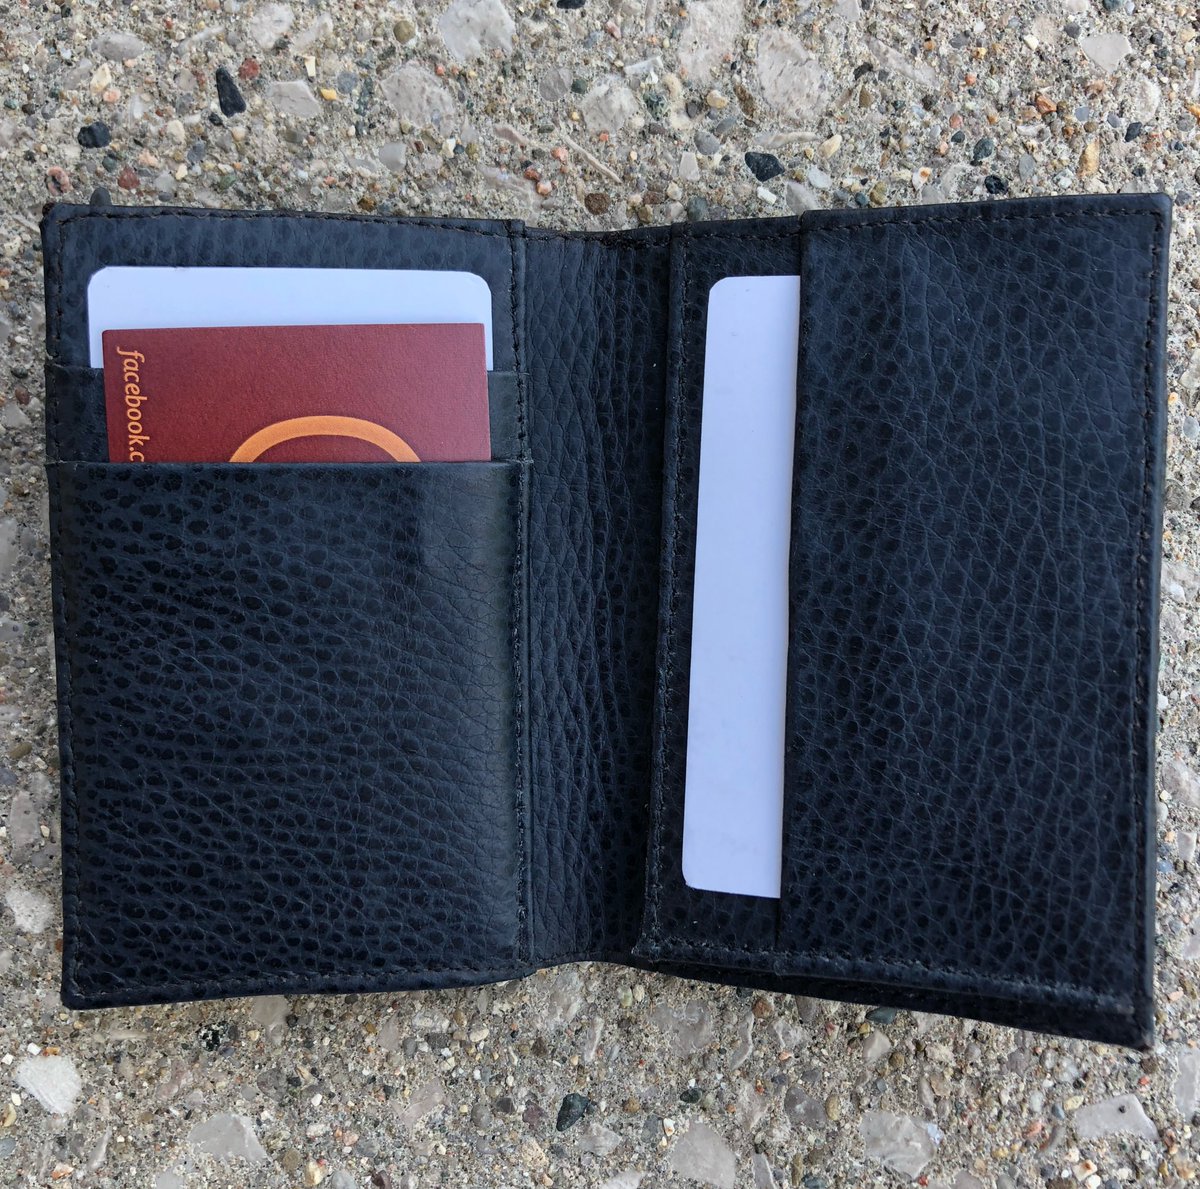 ⚒🔨 Custom Order is finished and Delivered to its new home! Amazing card wallet minimalist design 🙌🏼 —  #custom #cardholder #cardwallet #minimalist #windsor #smallbusiness #familyowned #lovelocal #leathercraft  #mensfashion #black #leatherwallet #gallupleather #topgrainleather